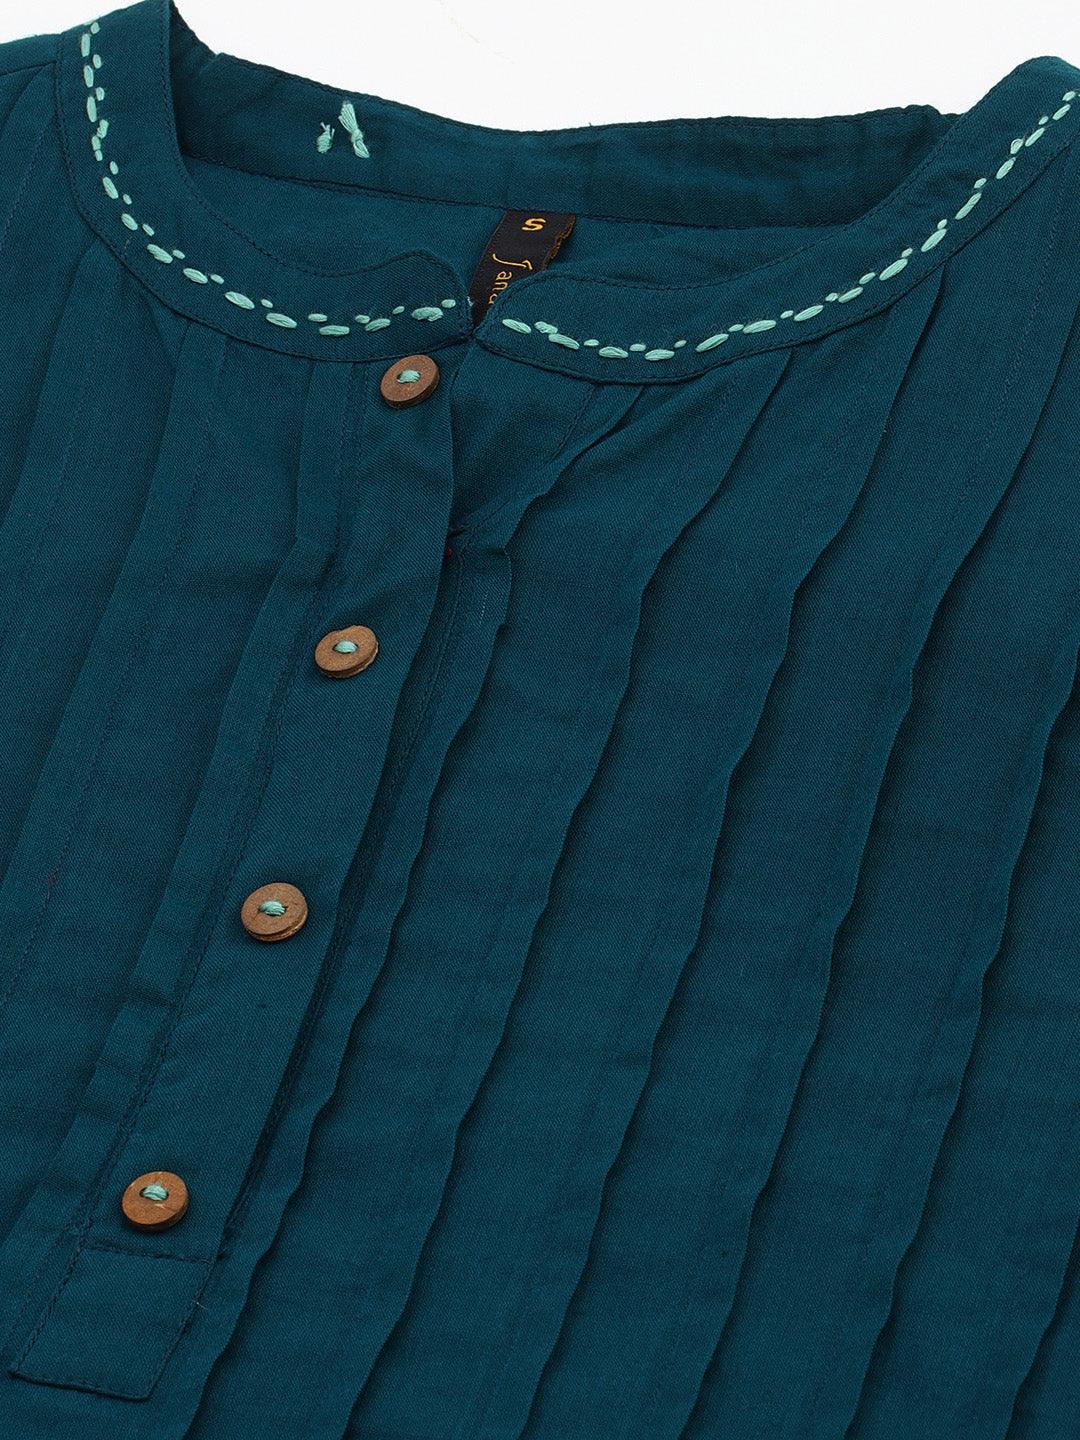 Teal Cotton Solid A-line Western Dress